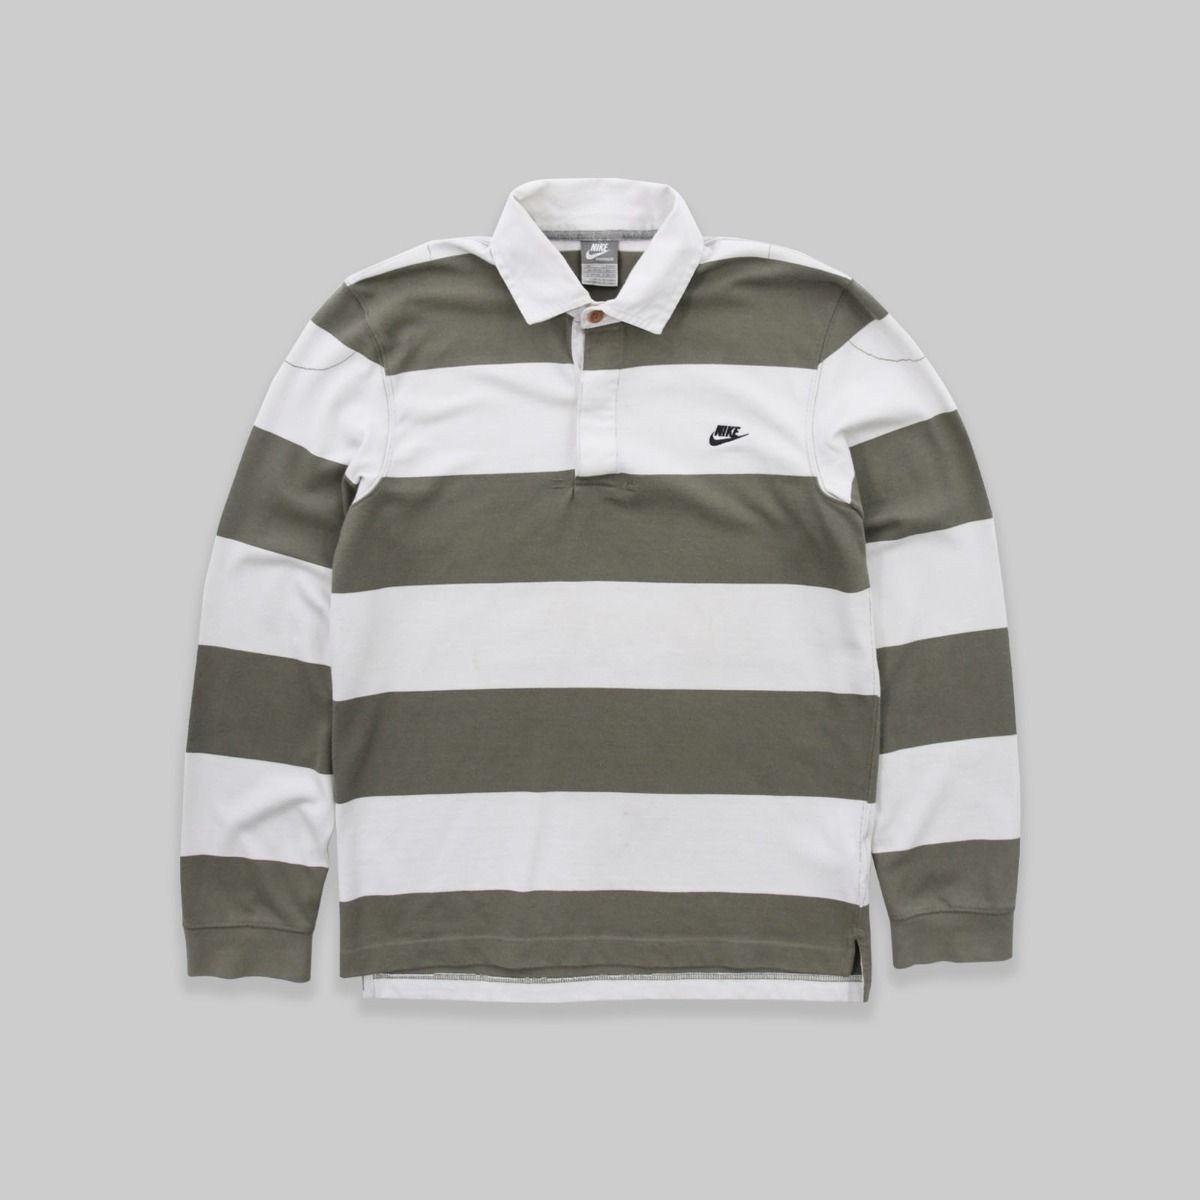 Nike Early 2000s Rugby Shirt